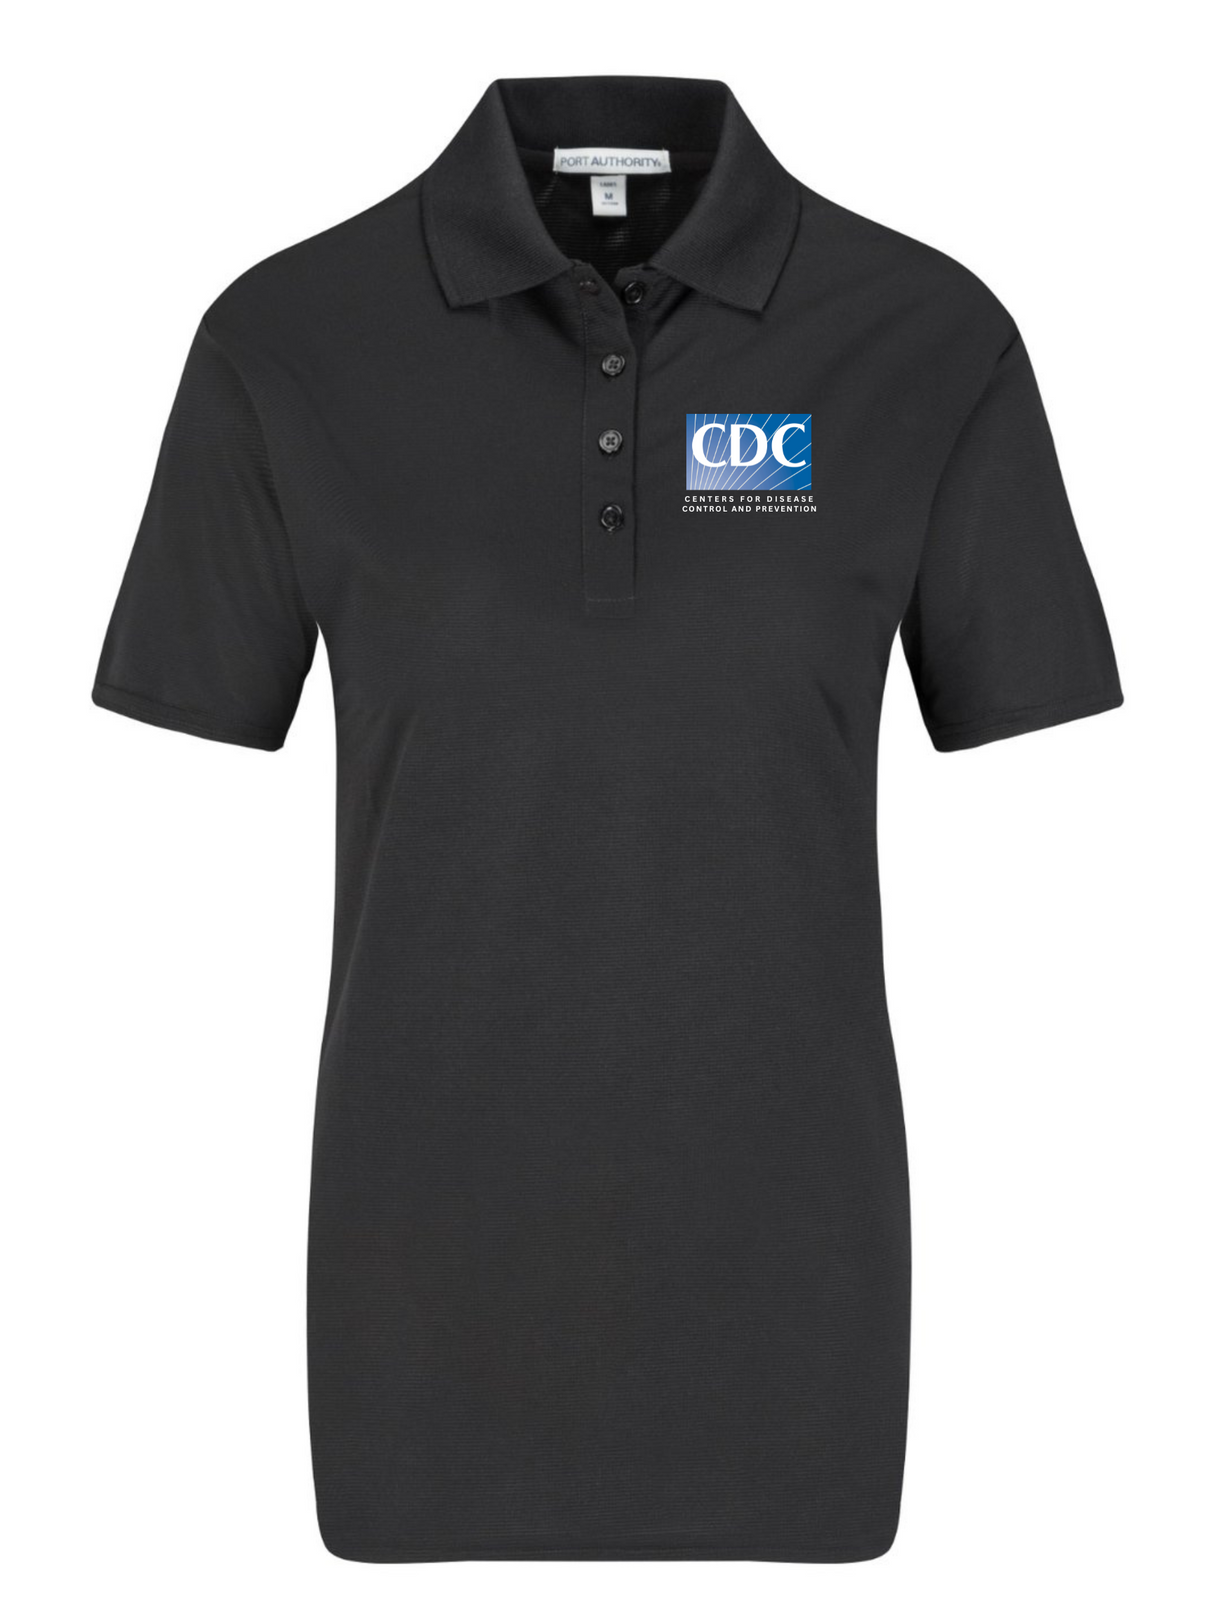 Centers for Disease Control and Prevention Polo Shirt - Women's Short Sleeve - FEDS Apparel